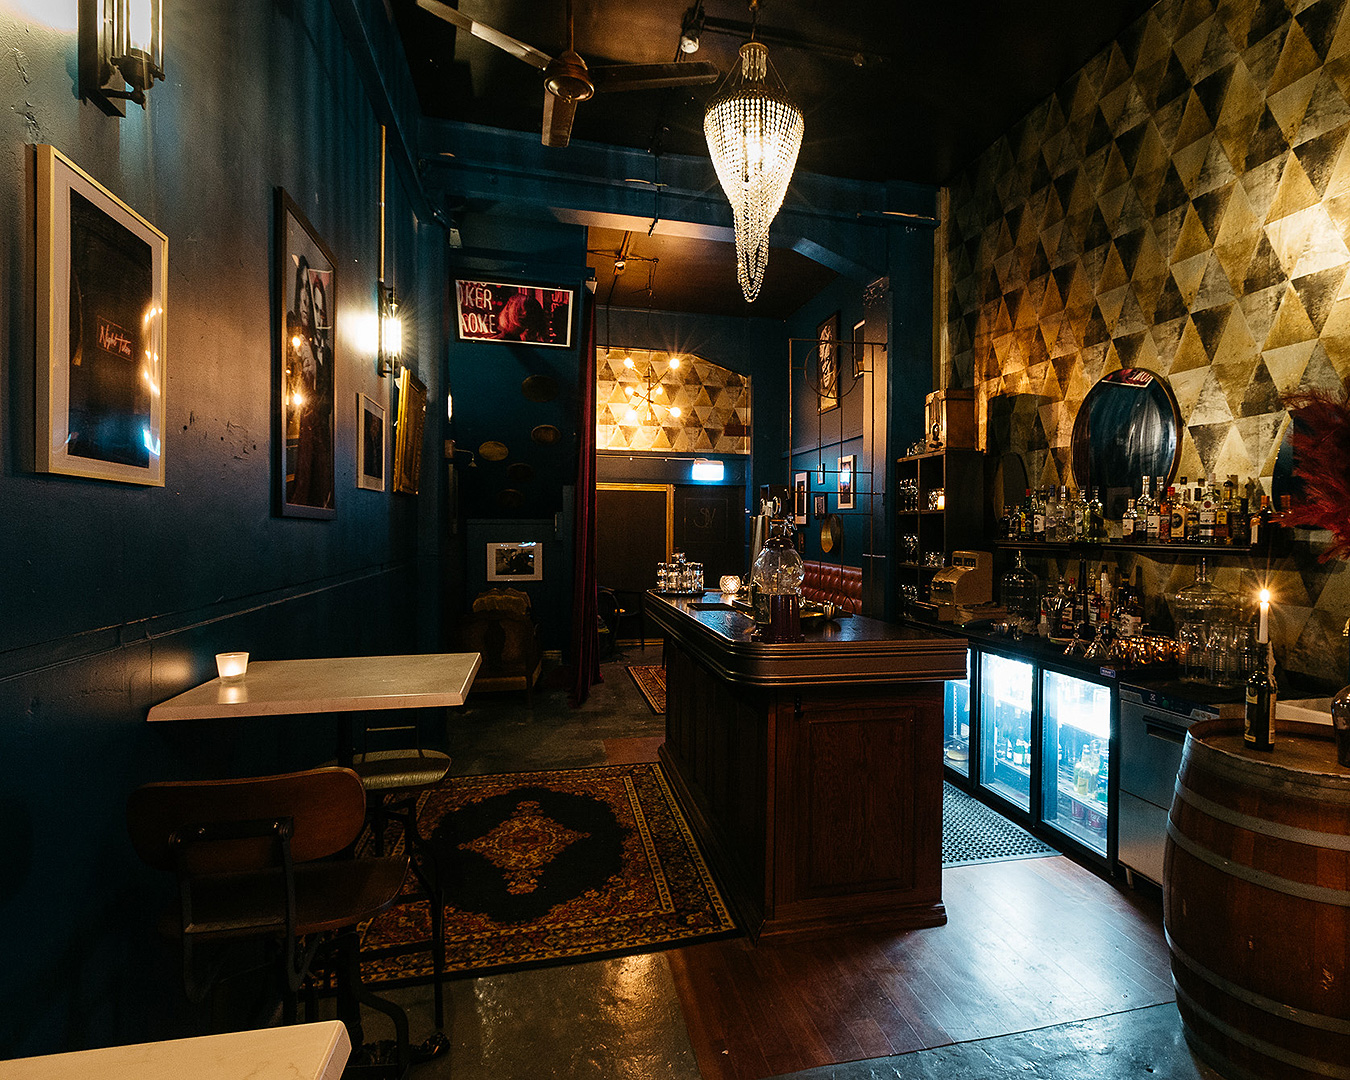 The interior of the sumptuous Sly Bar on Auckland